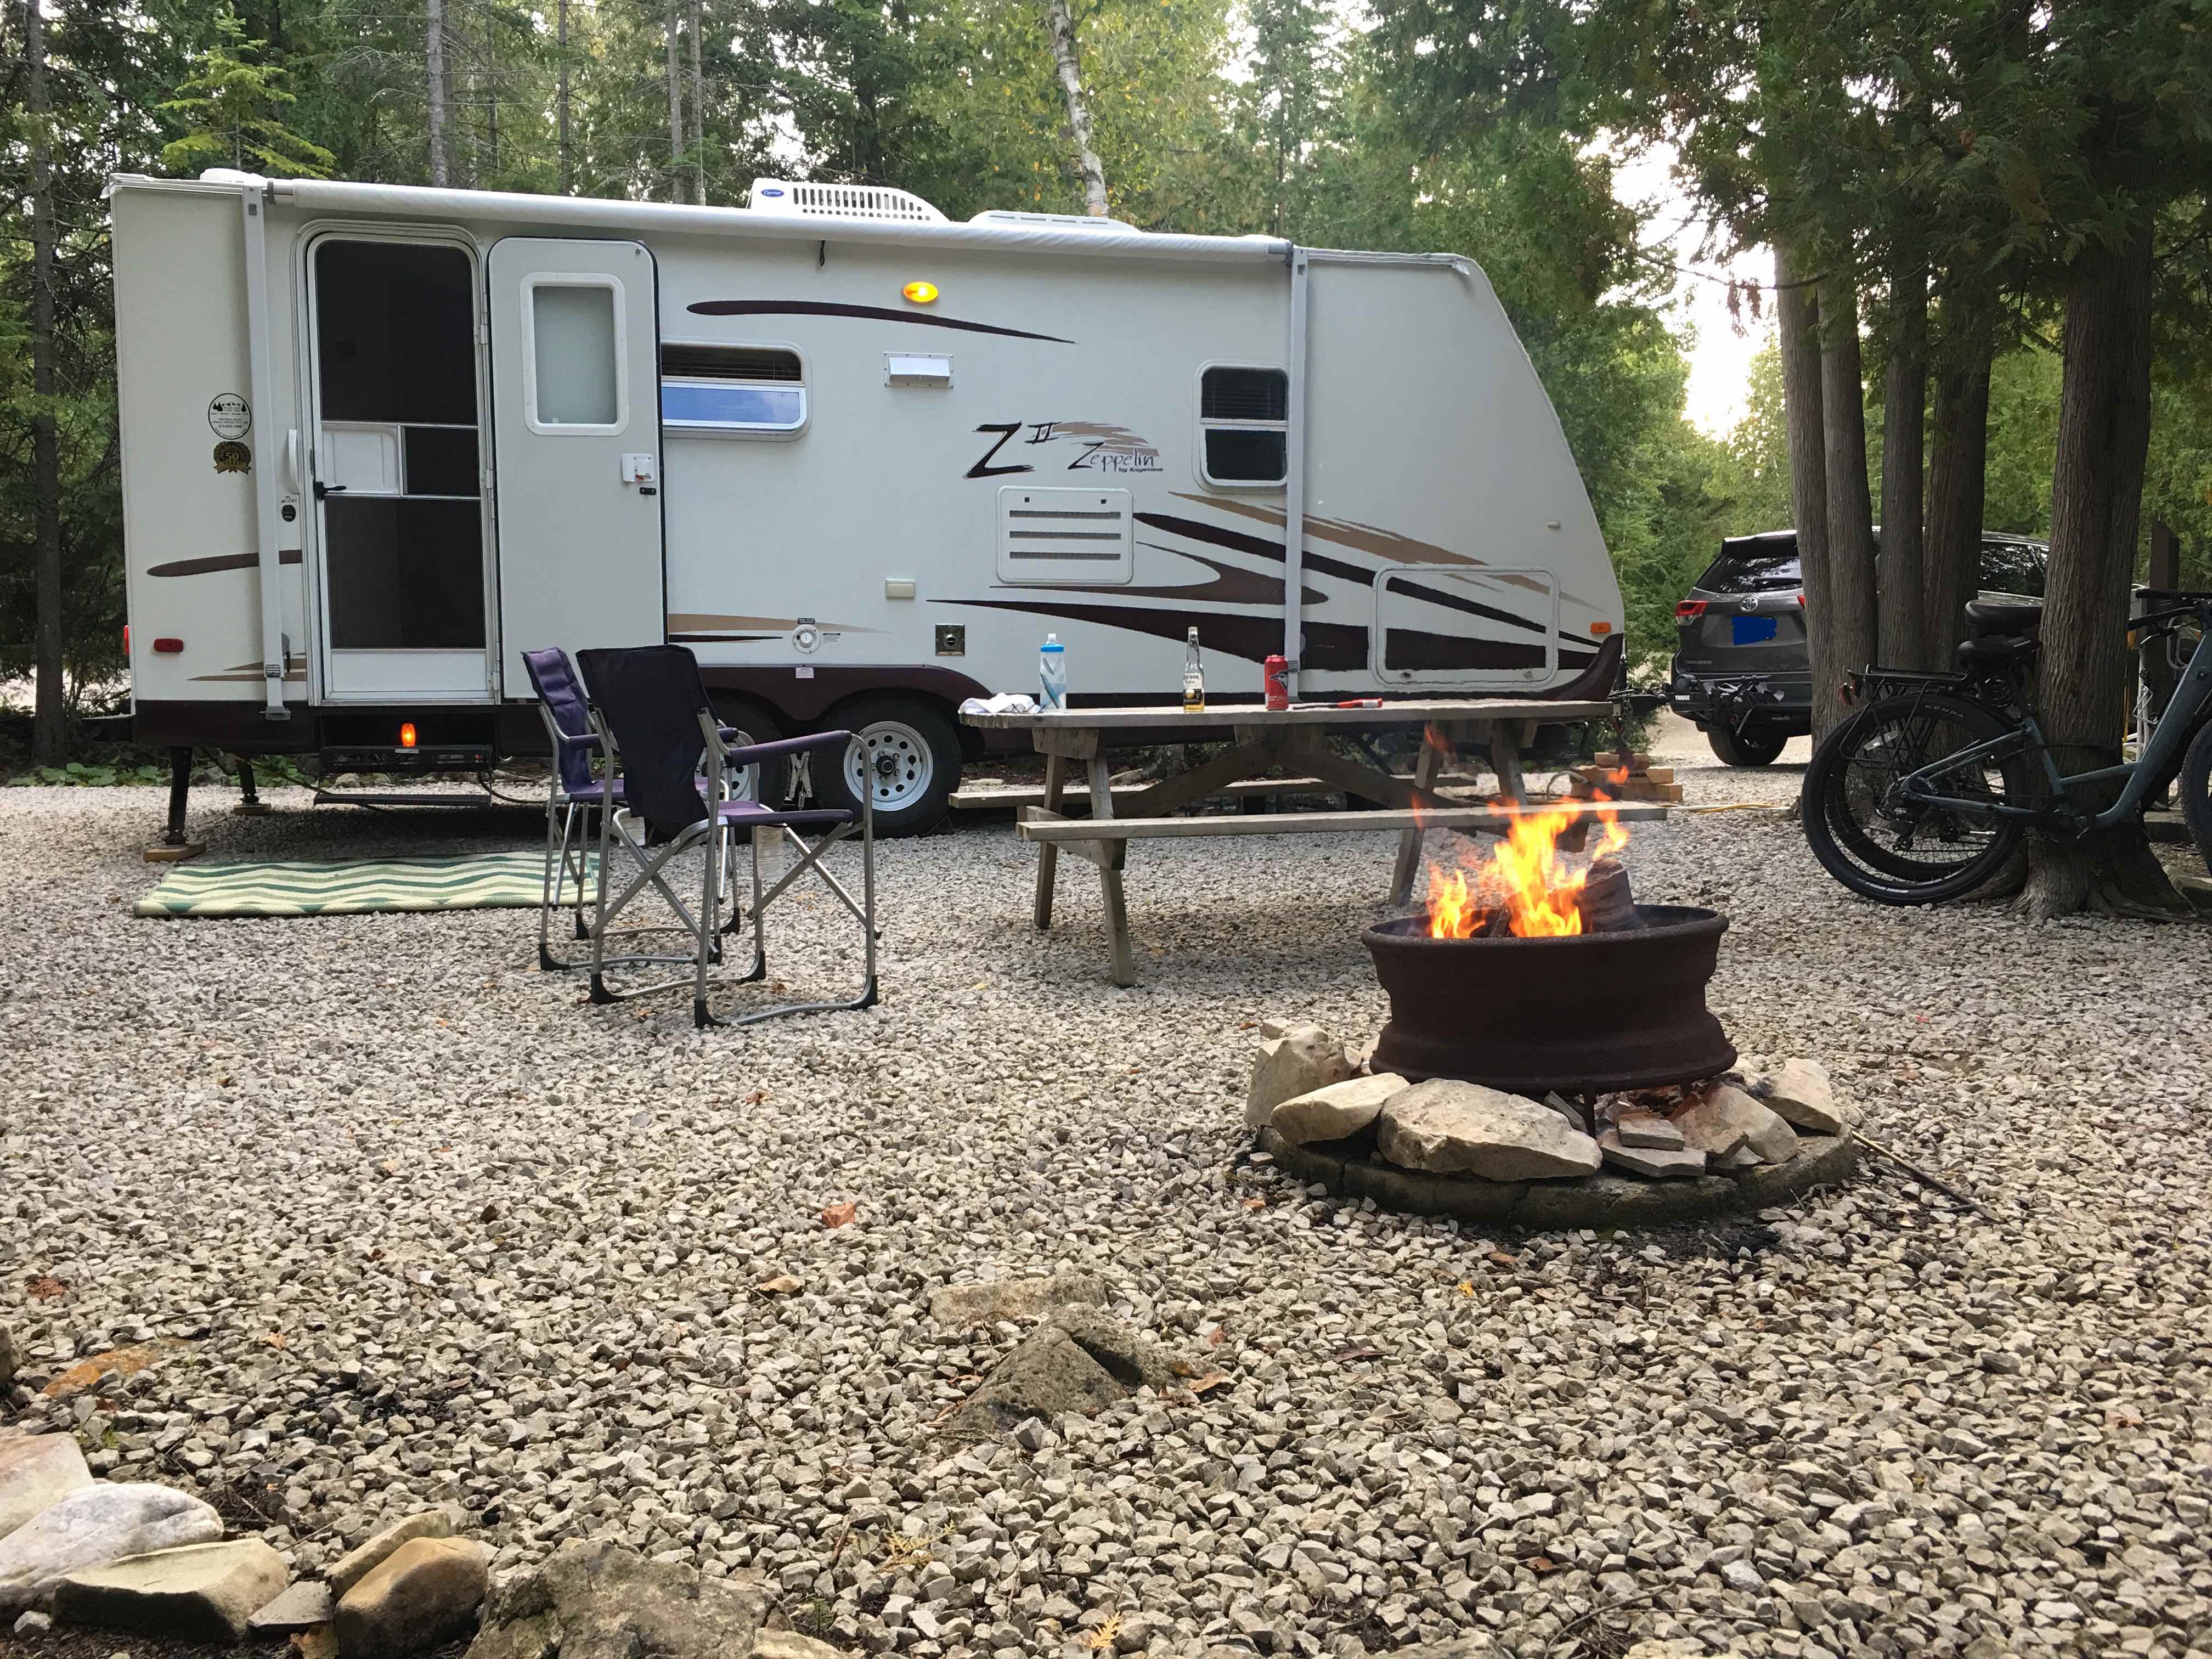 A camper with a fire pit in front of itDescription automatically generated with low confidence